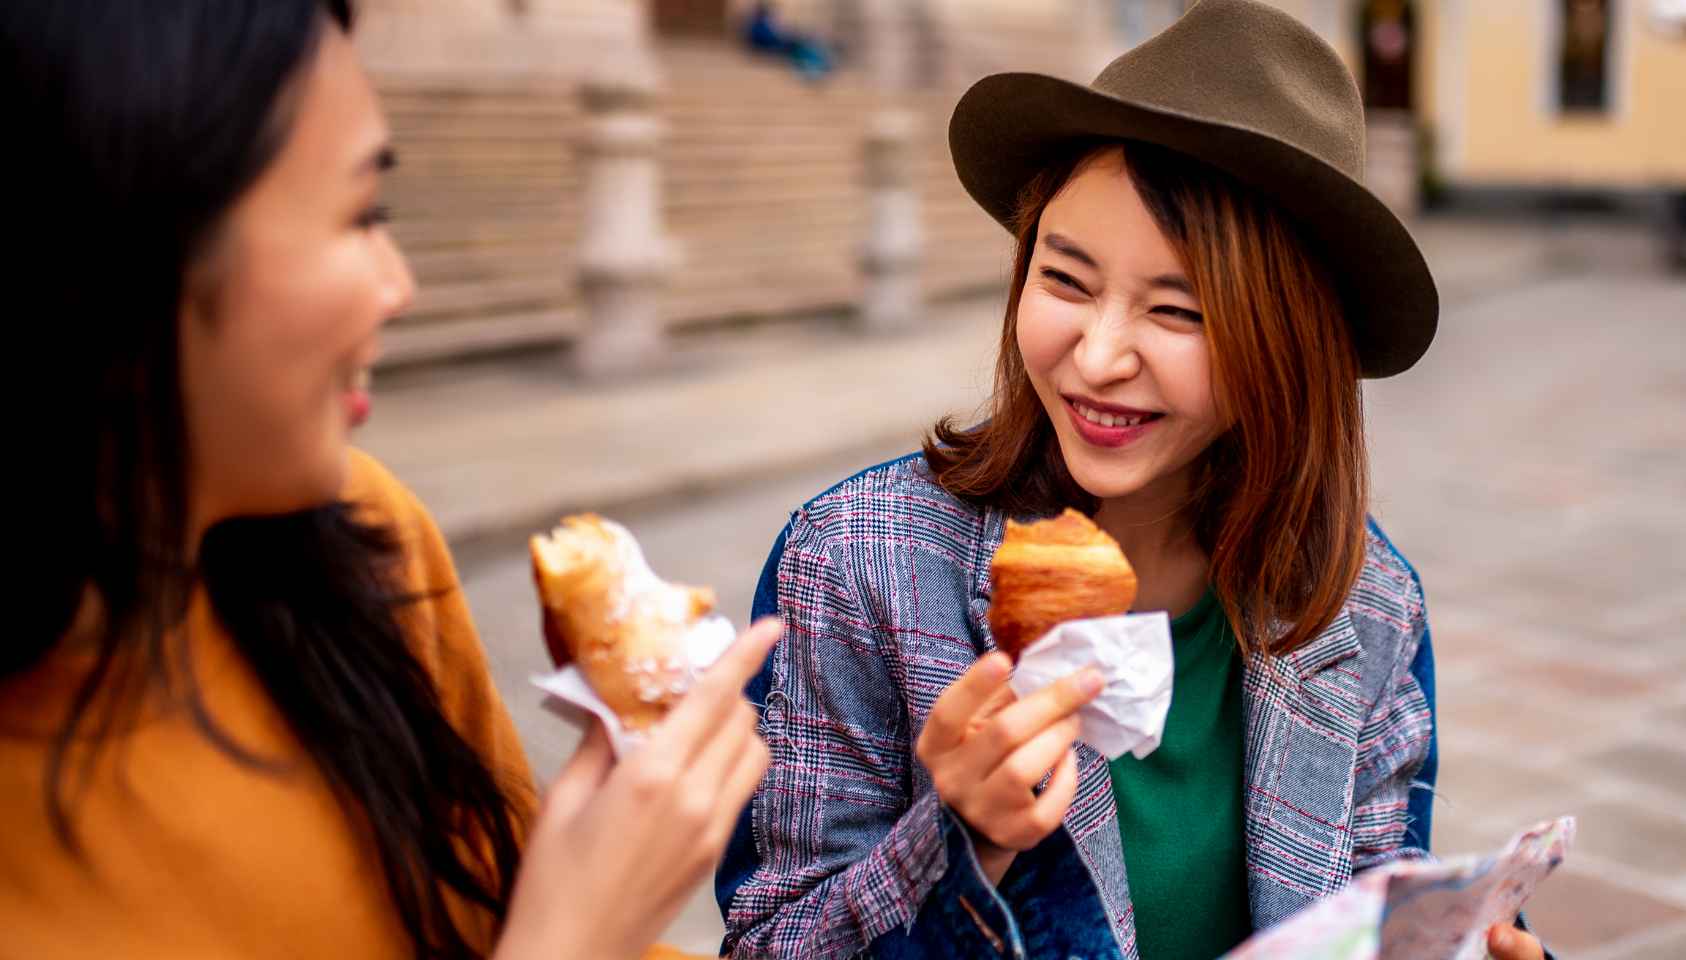 Two young women are smiling at each other while they sit outside and eat croissants